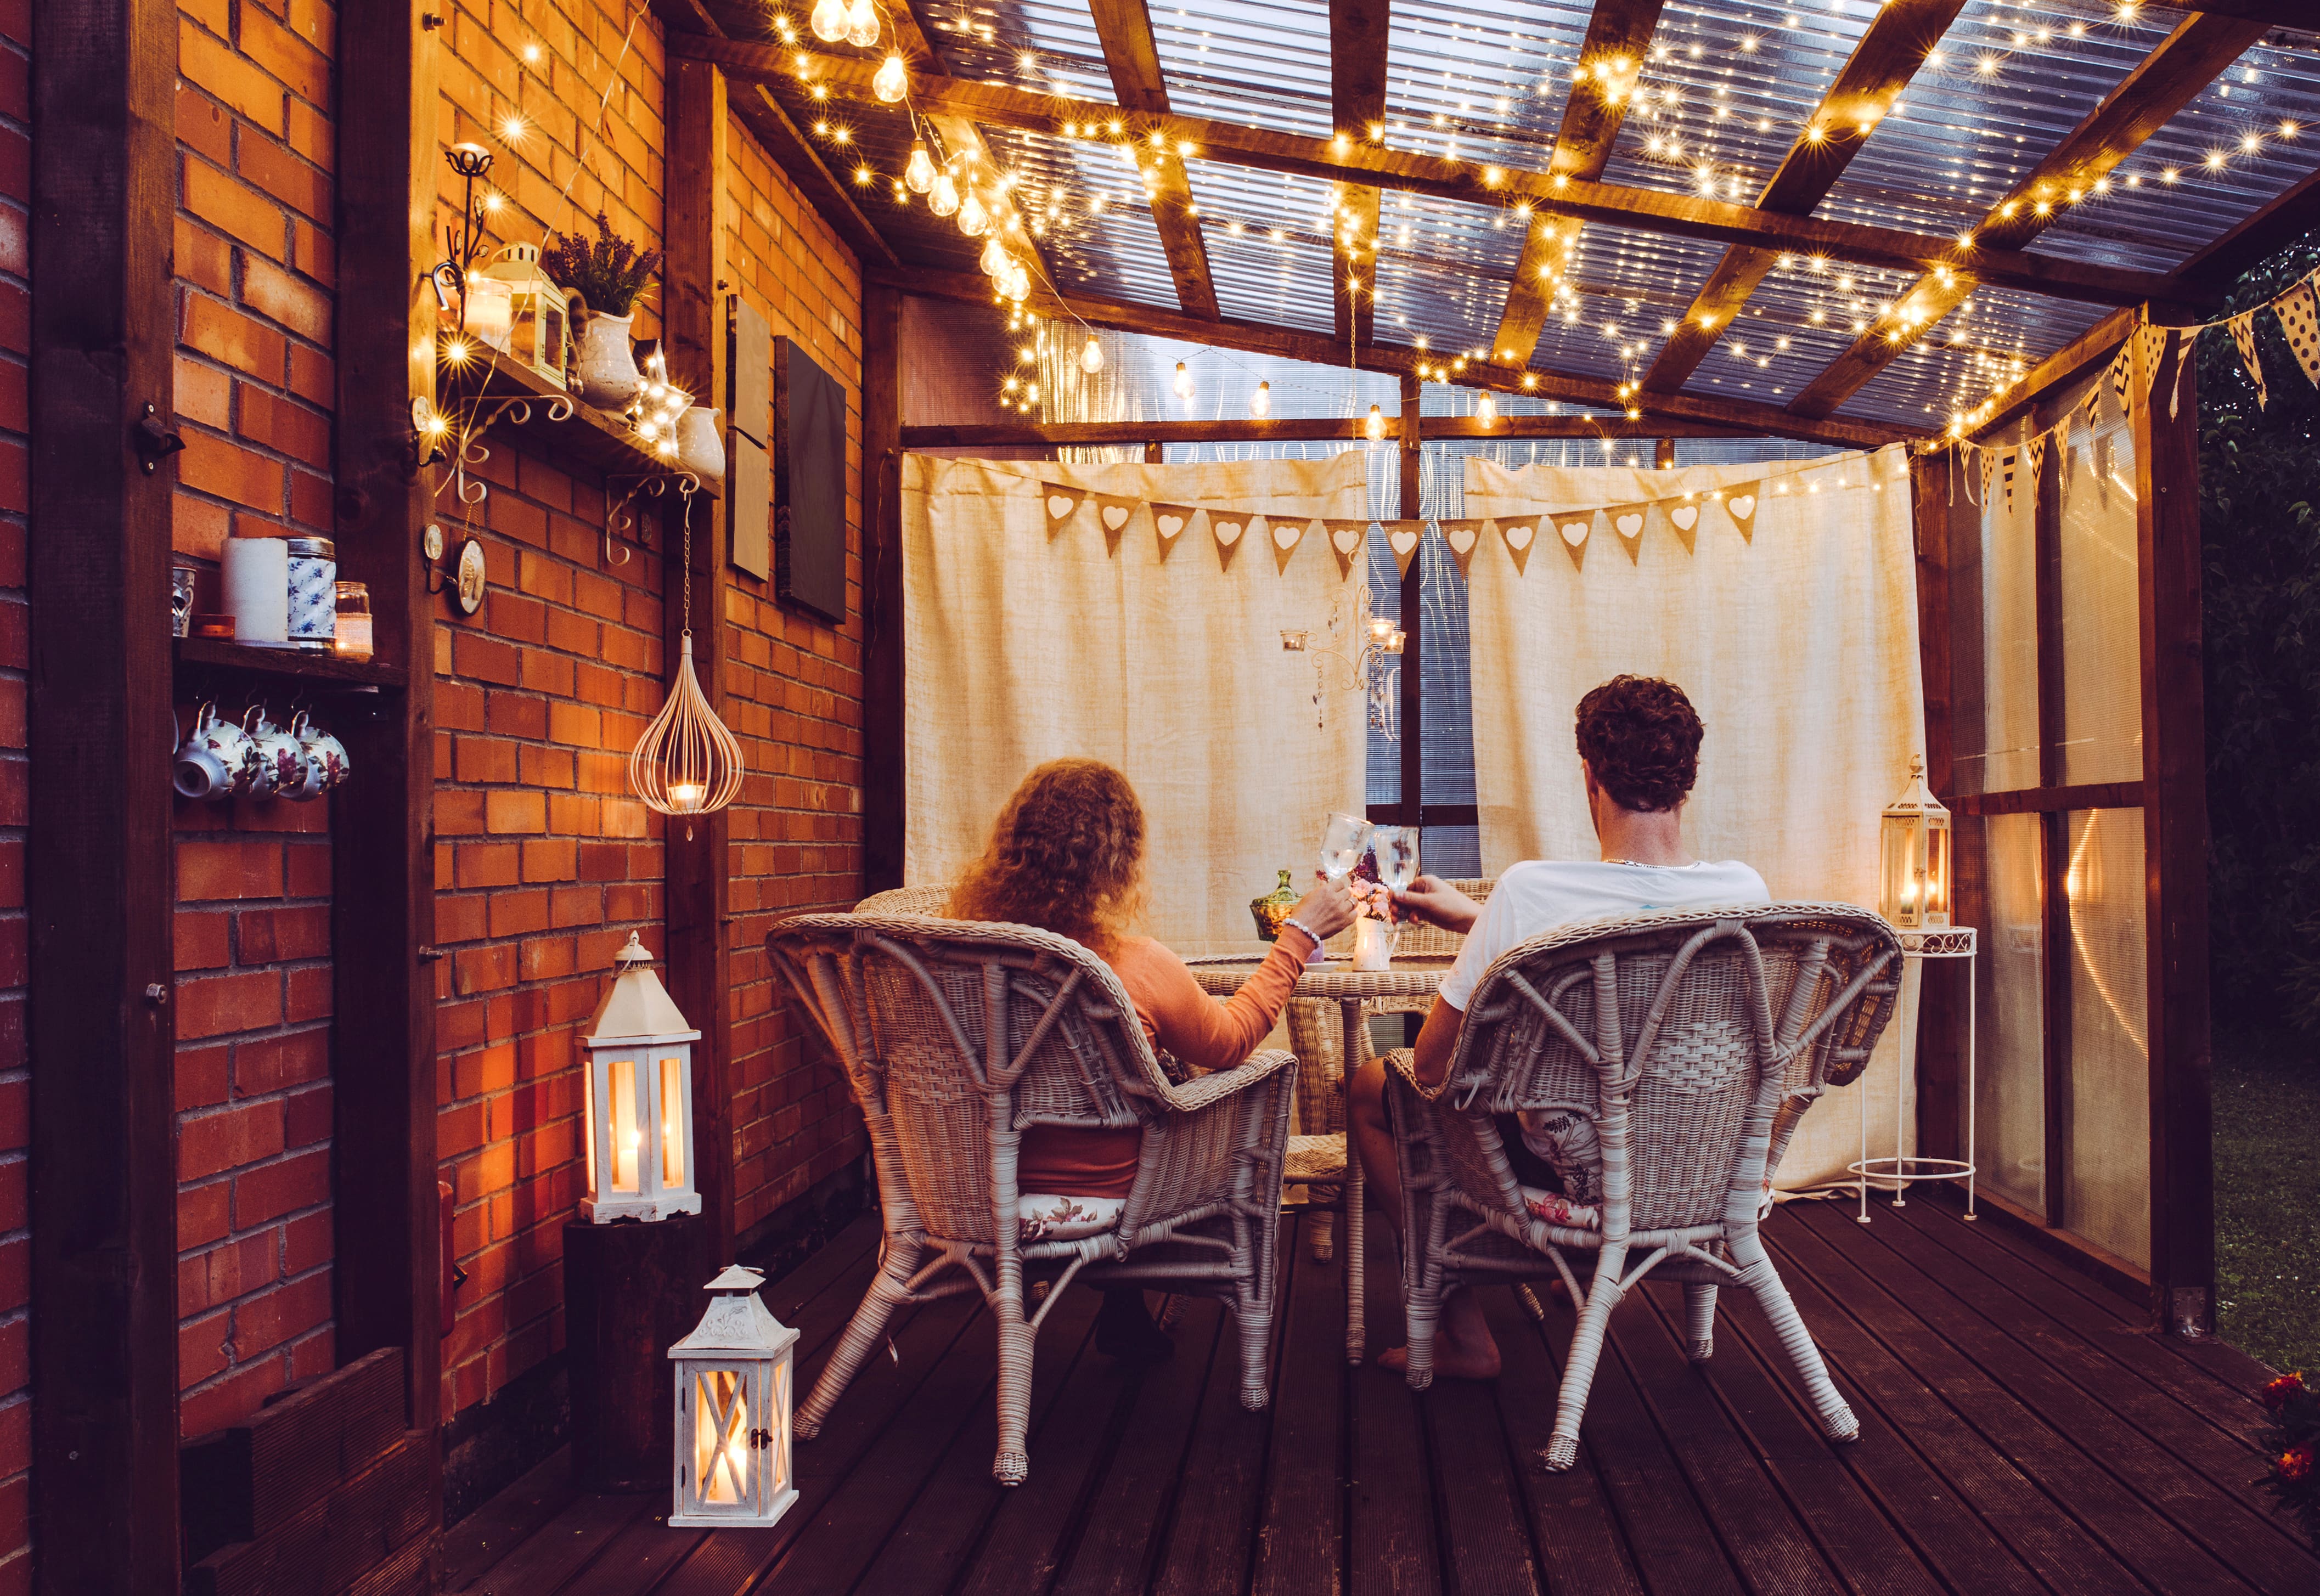 The Complete Guide to Garden Fairy Lights